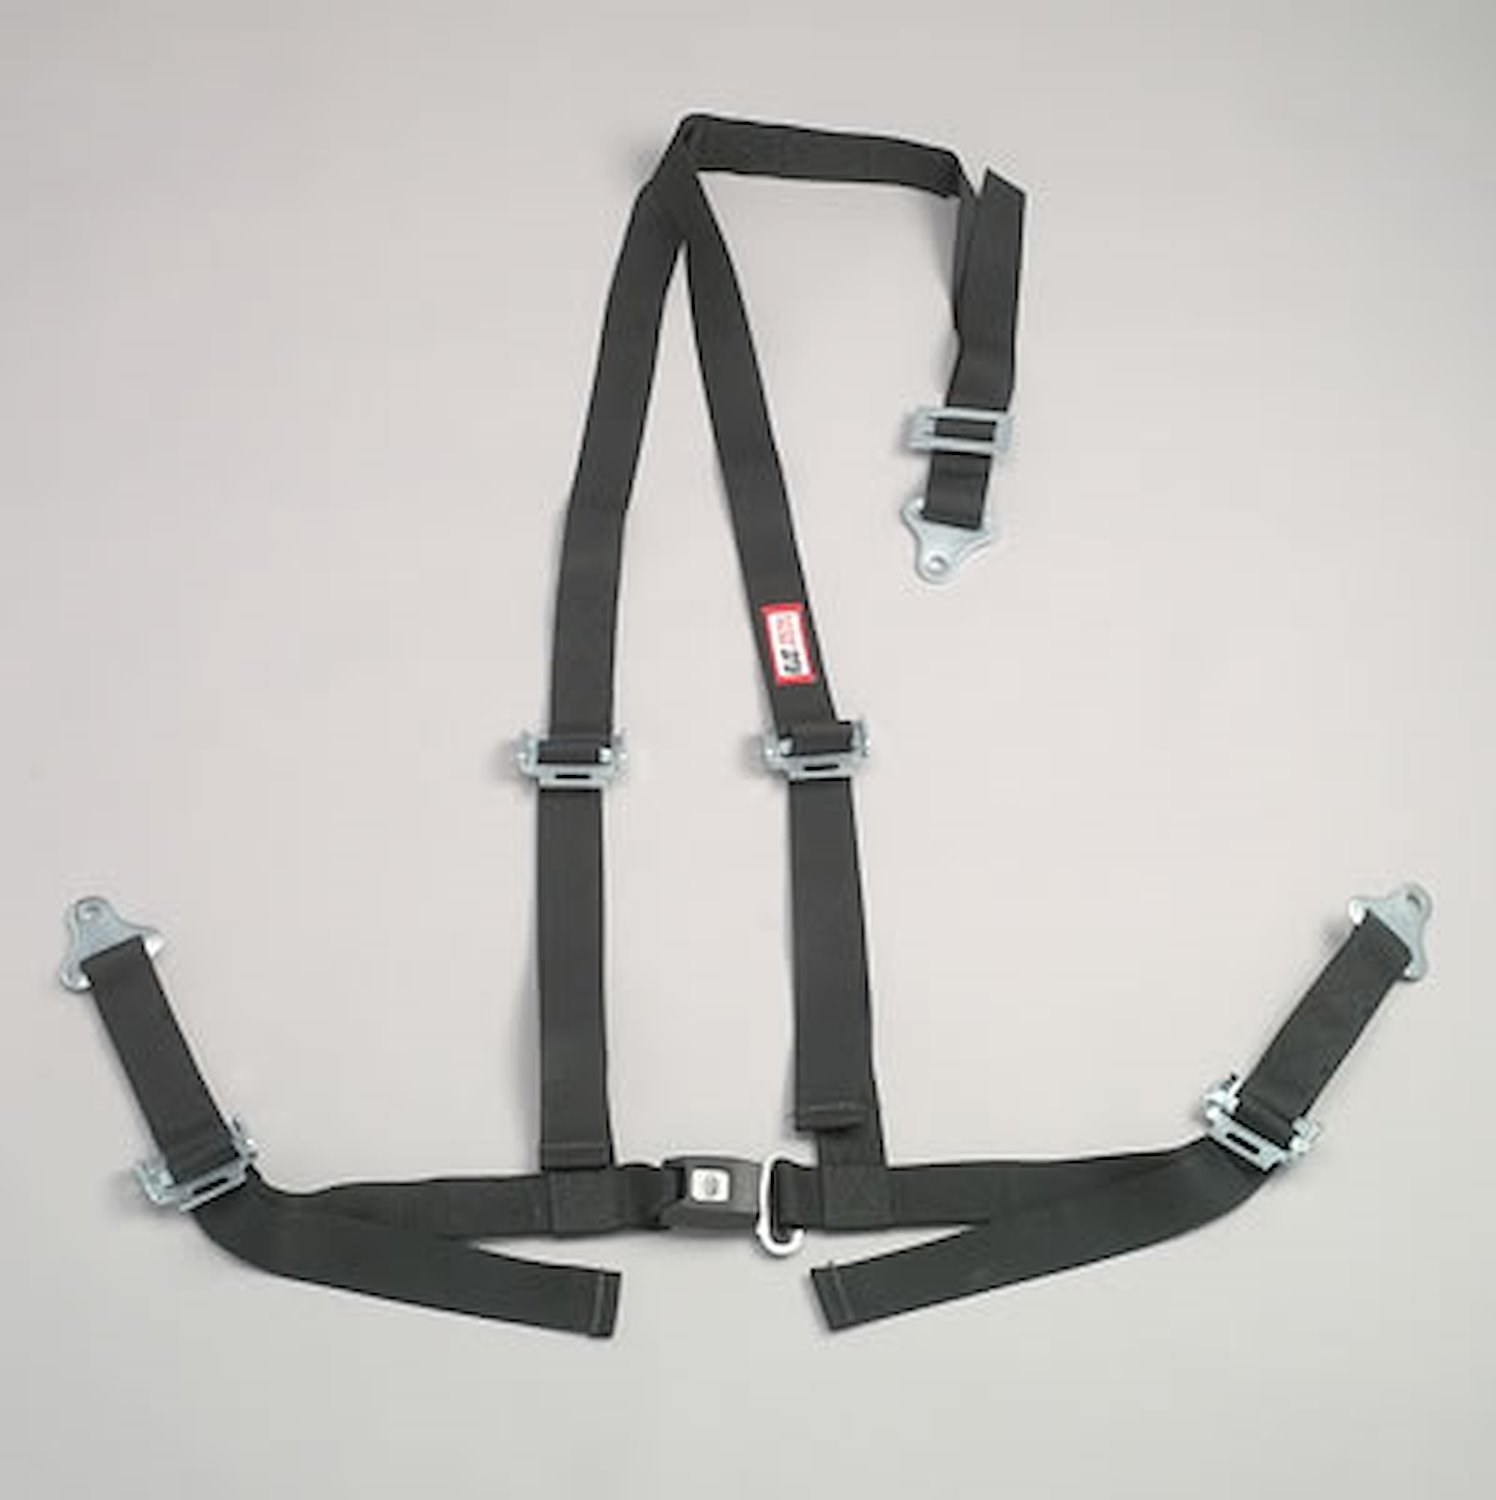 NON-SFI B&T HARNESS 2 PULL UP Lap Belt 2 S. H. V ROLL BAR Mount ALL WRAP ENDS KHAKI